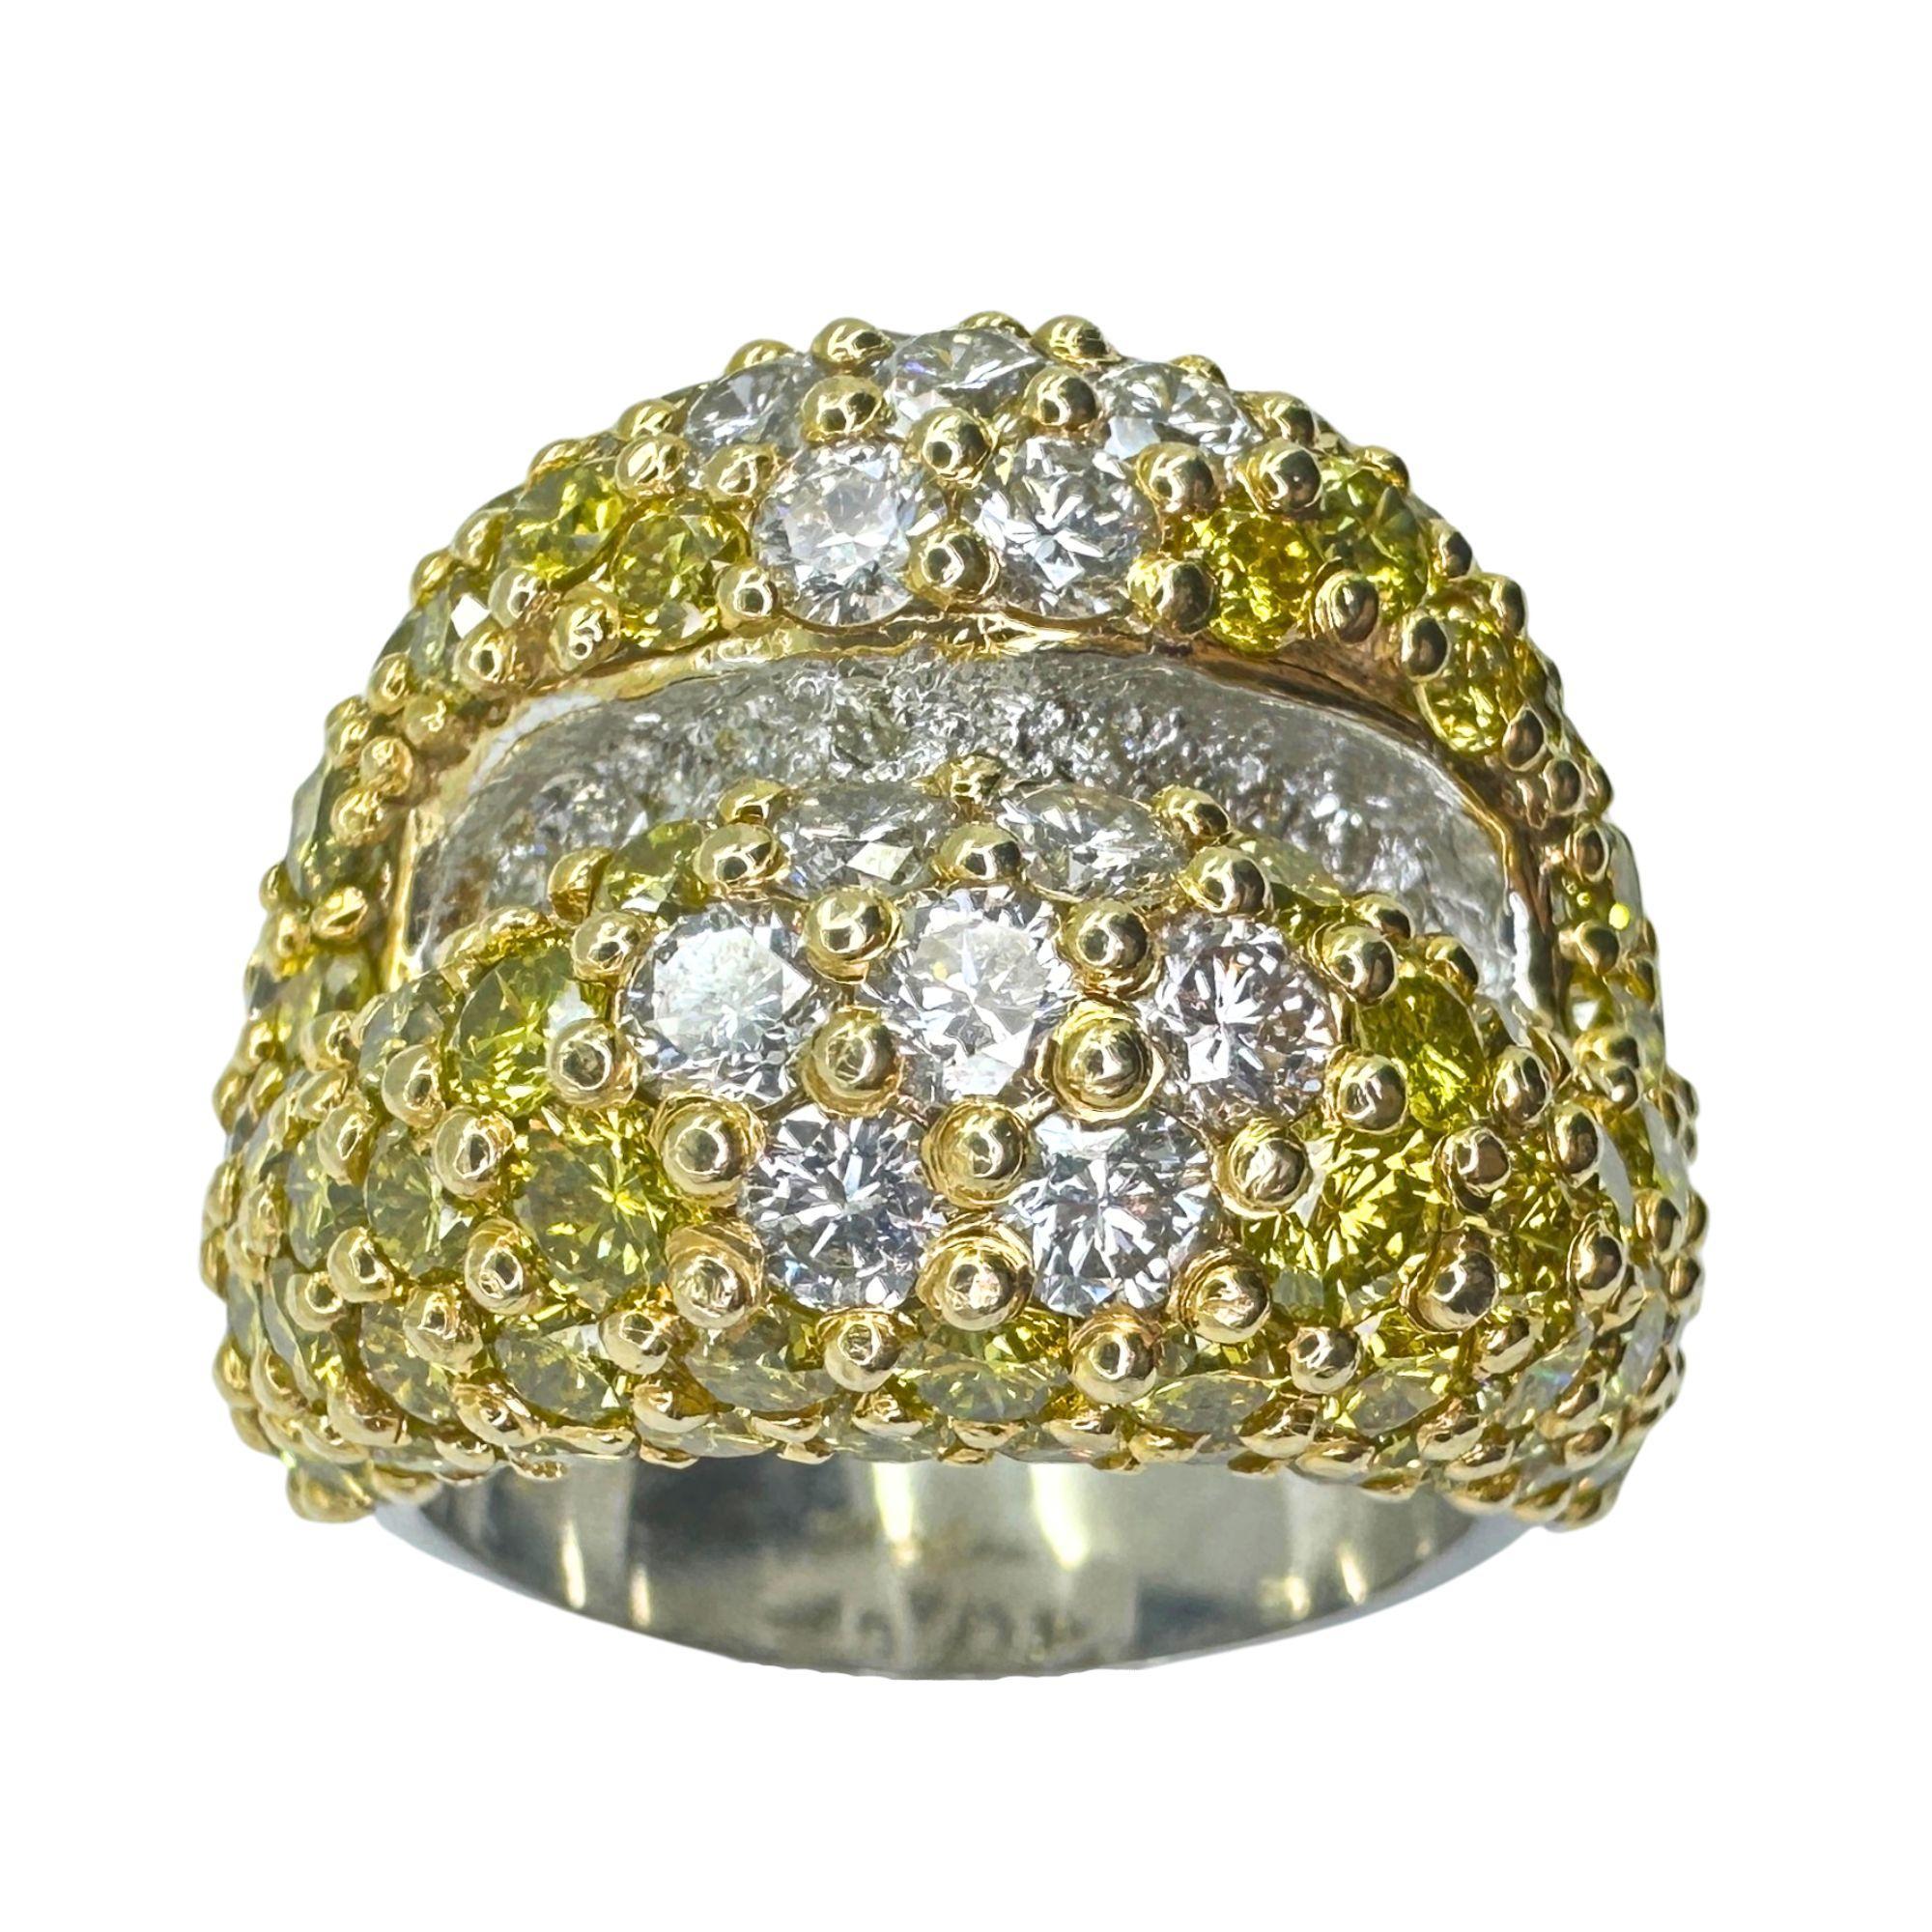 Indulge in luxury with this 18k heavy white and yellow diamond ring. The 5.63 carats of yellow diamonds and 0.27 carats of white diamonds are sure to add a pop to your outfit. In good condition, this ring is marked with 